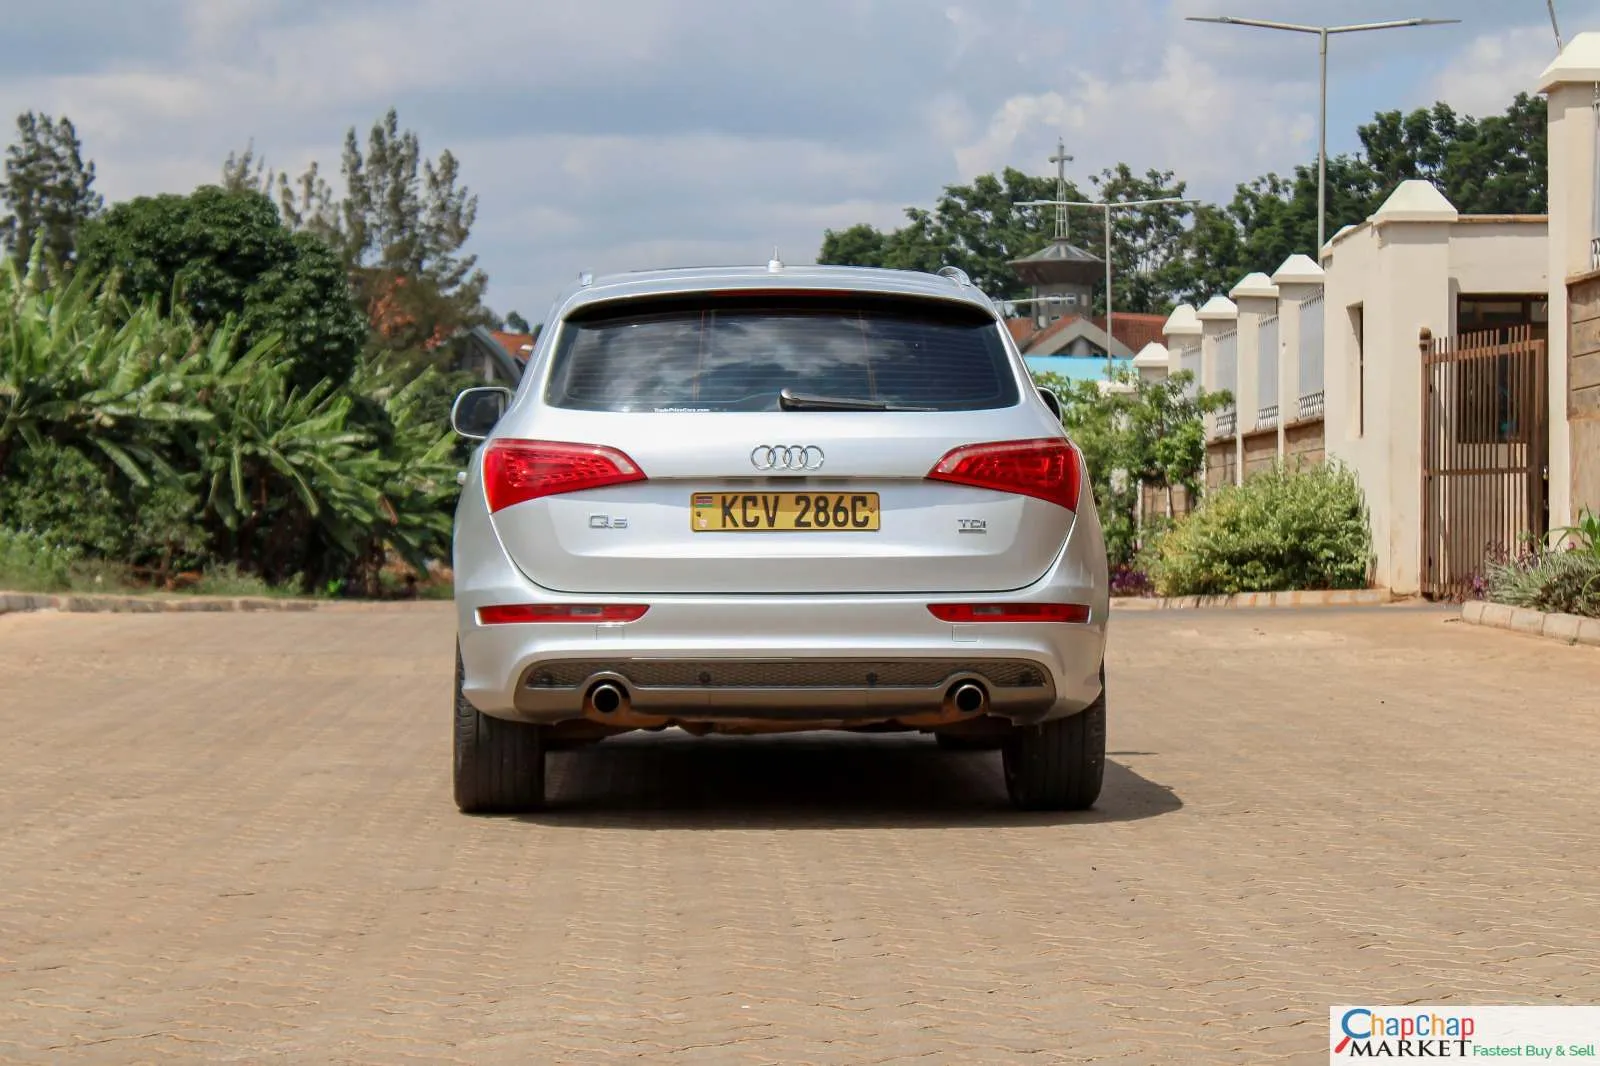 AUDI Q5 QUICK SALE You Pay 30% deposit Trade in Ok EXCLUSIVE AUDI Q5:for sale in kenya hire purchase installments 🔥